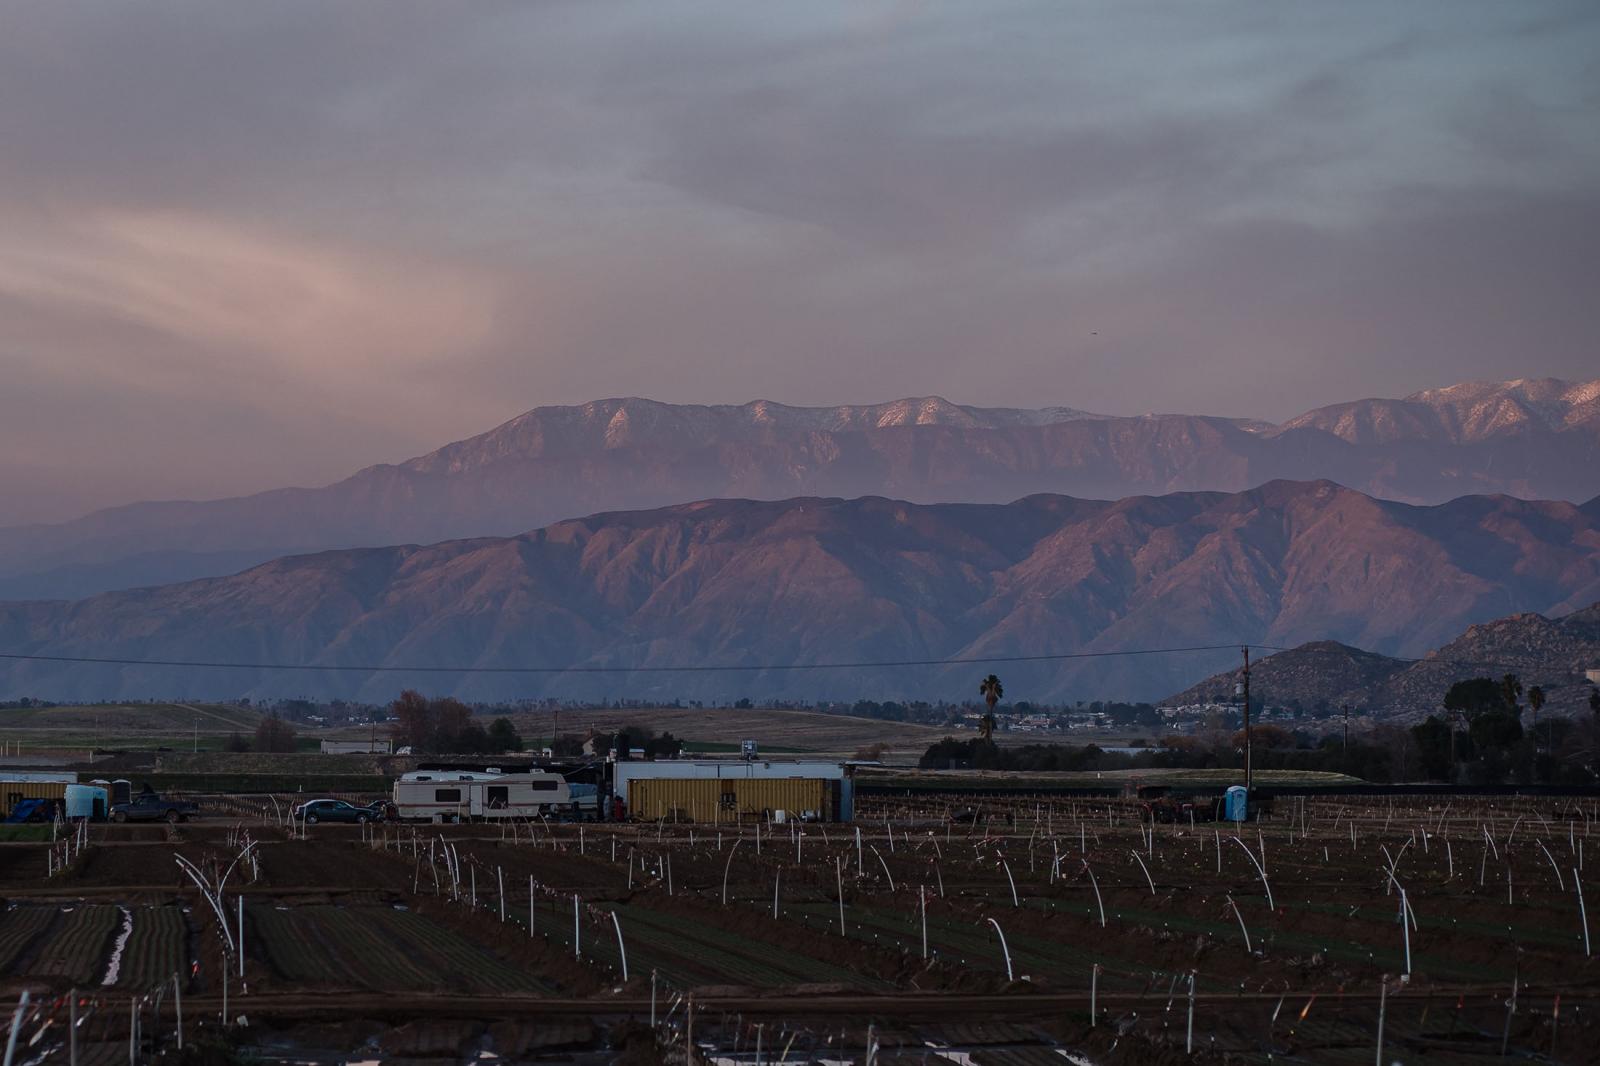 A view of a farm with Mount San Gorgonio in the background in Hemet, California on February 8, 2021.